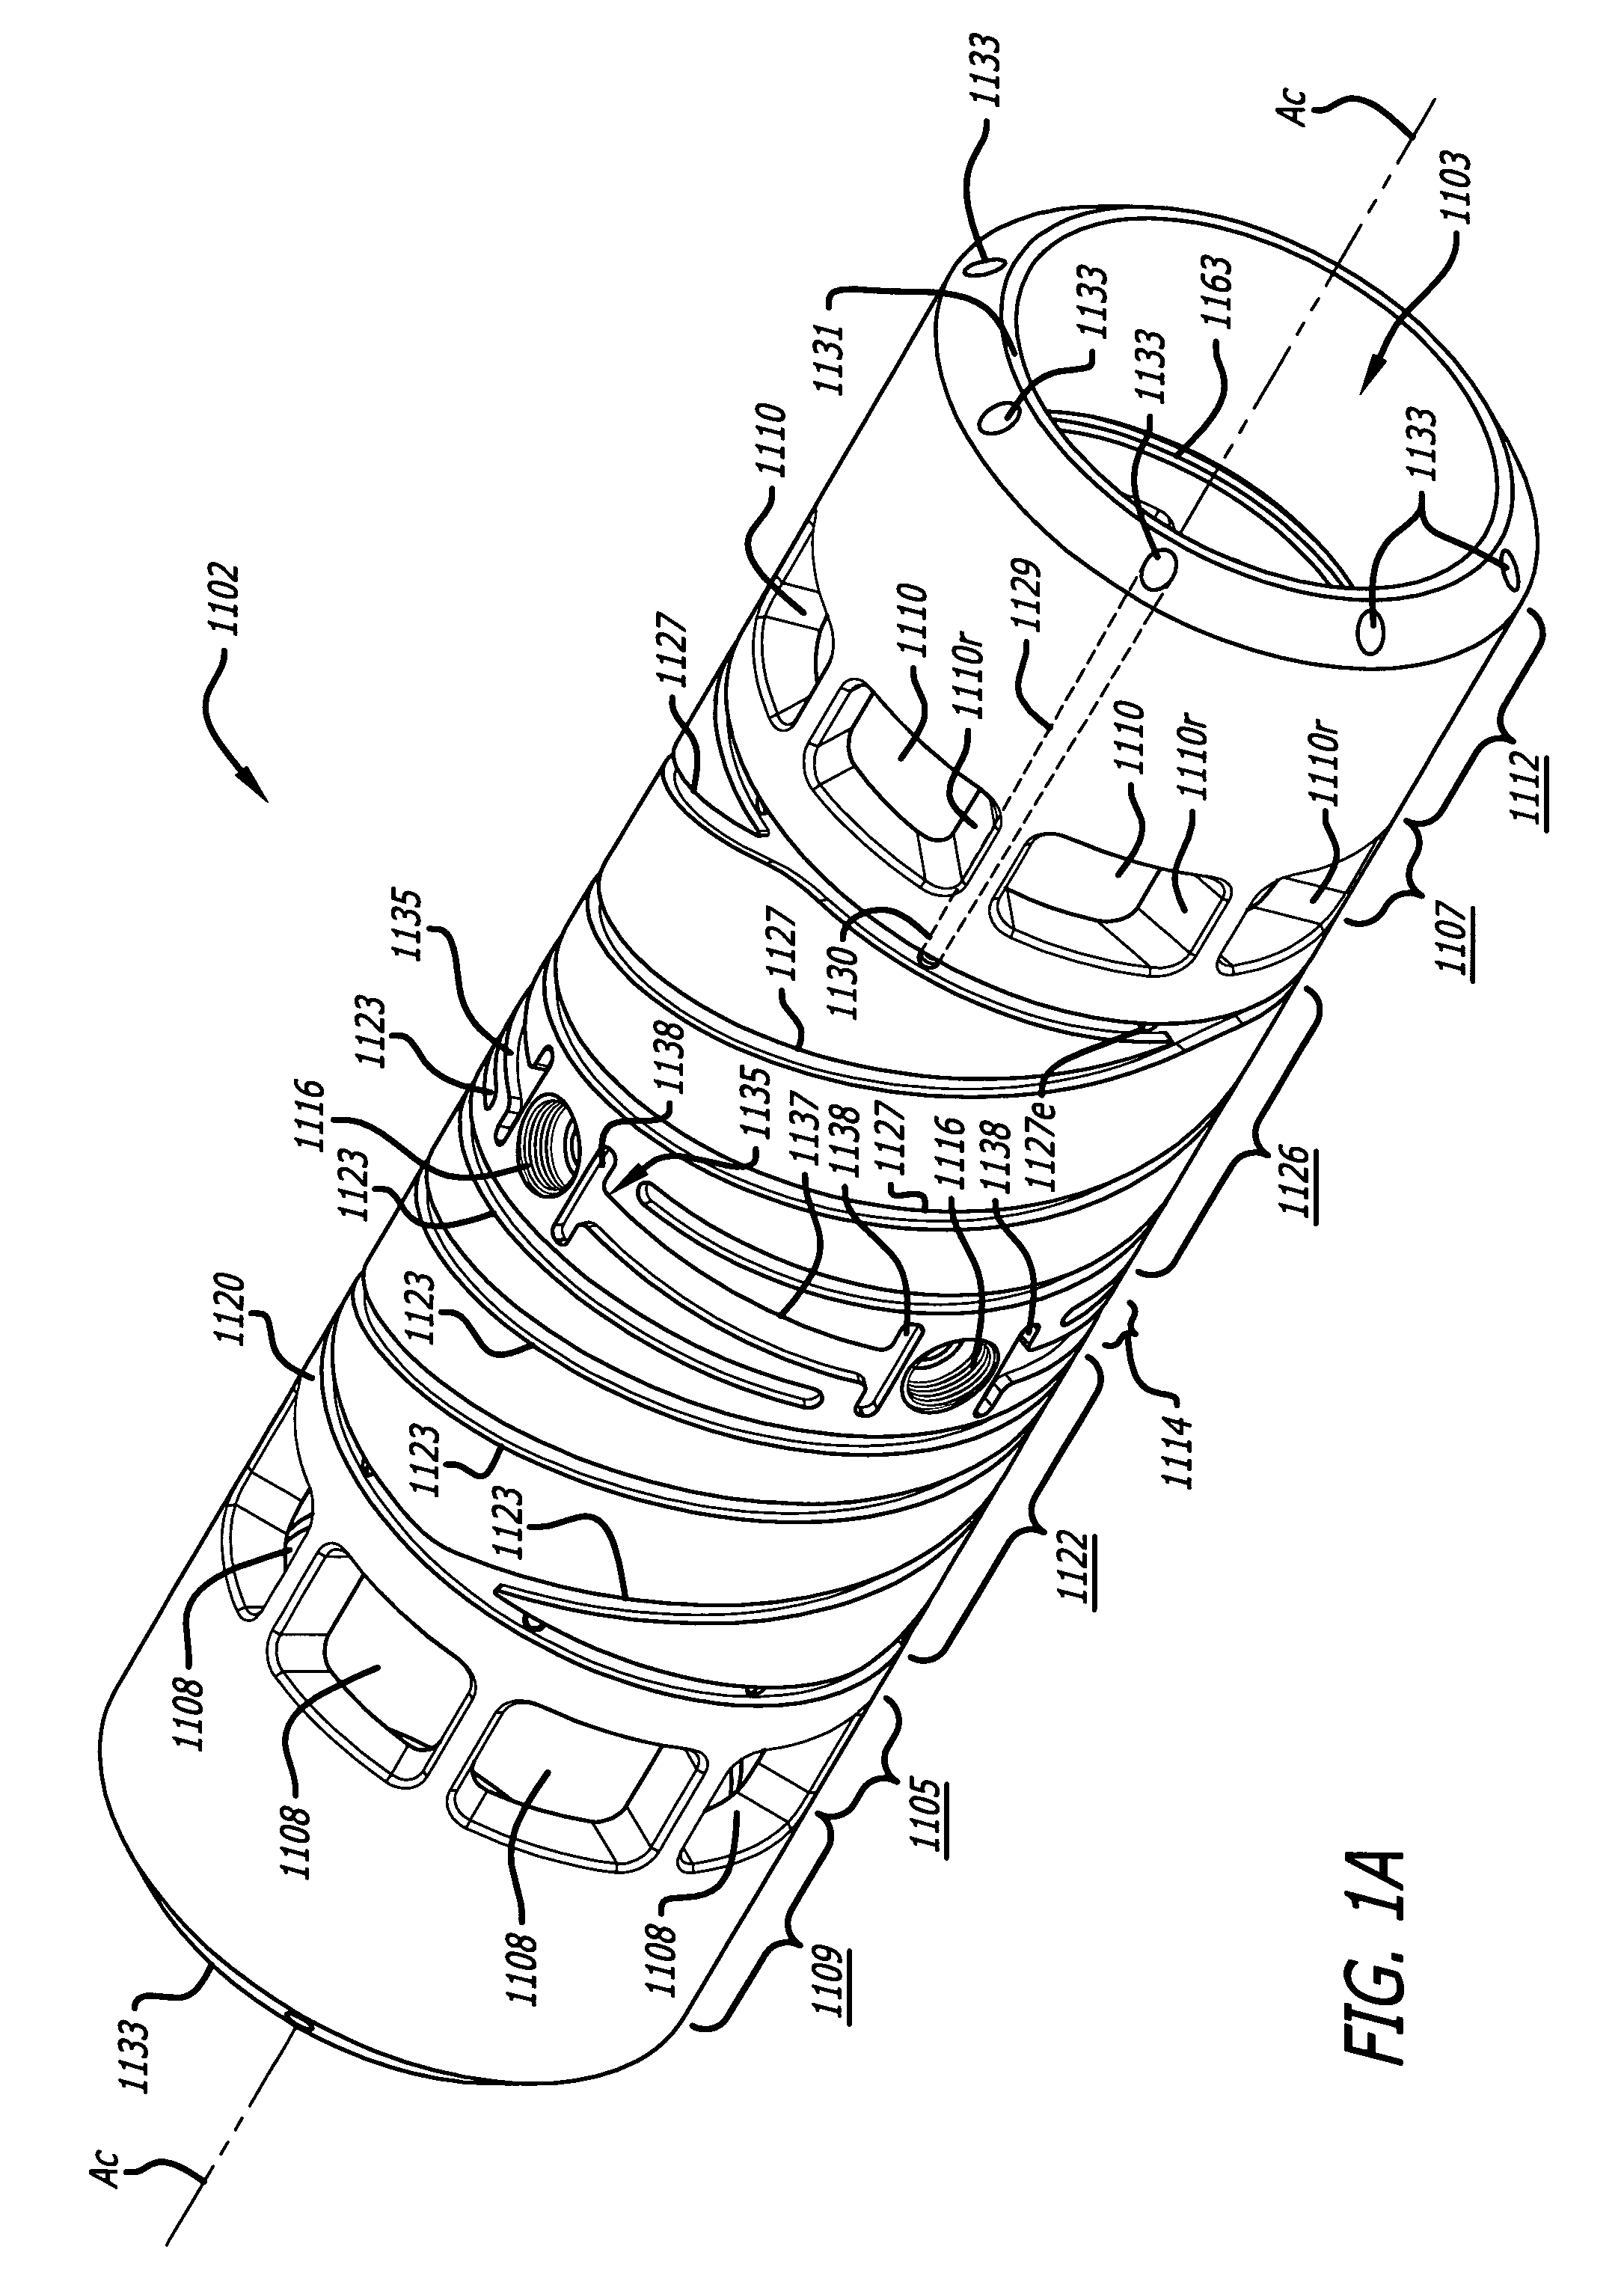 Cylinder and piston assemblies for opposed piston engines